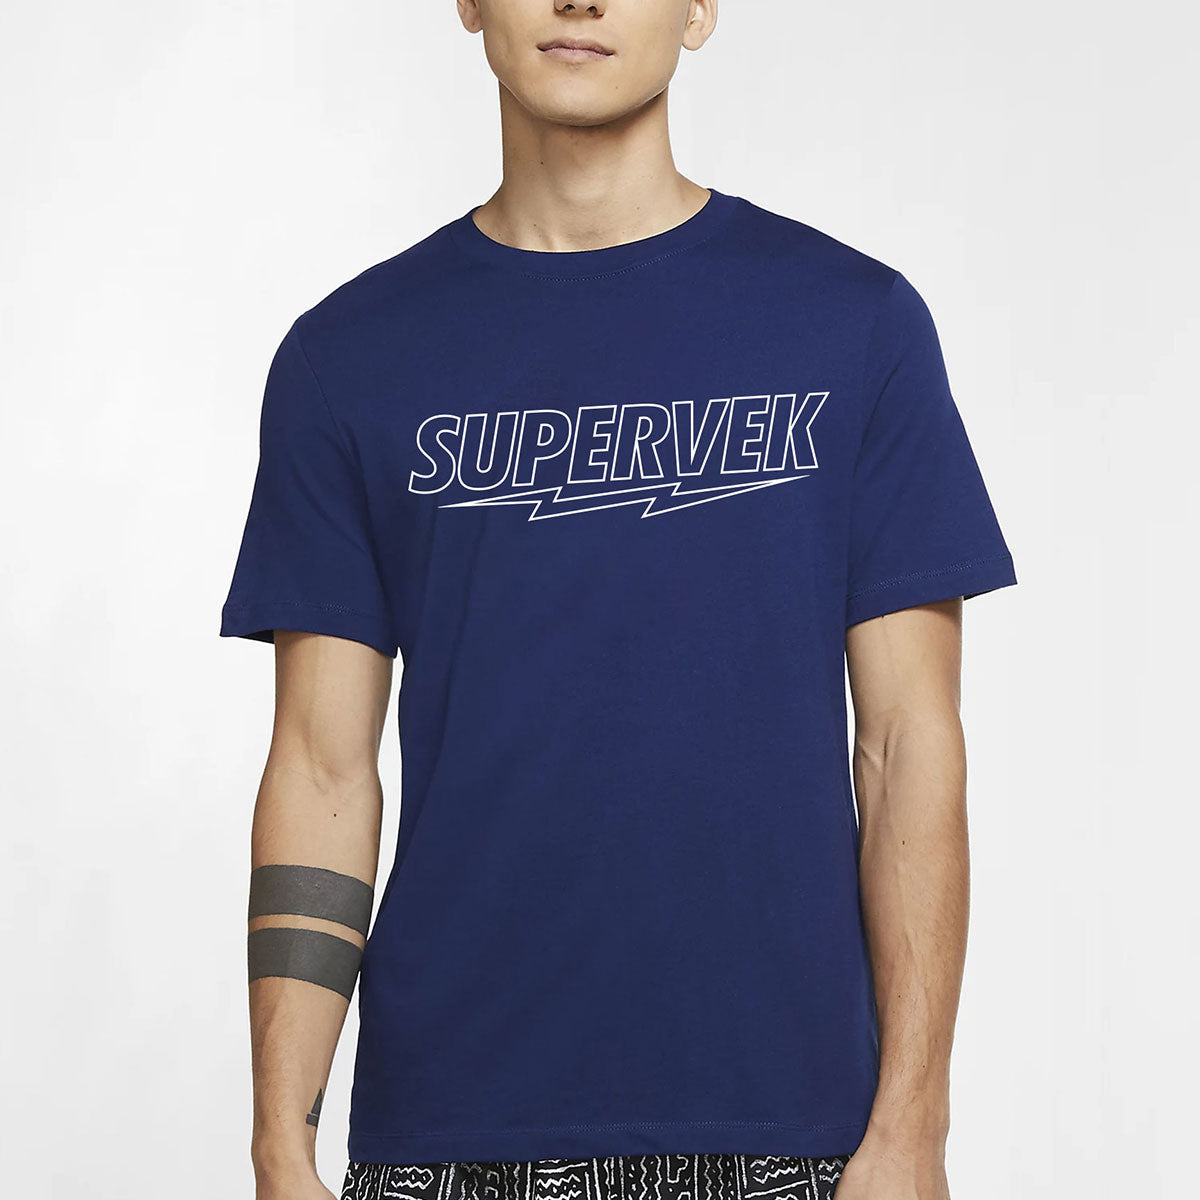 Thunder stroked Graphic T-Shirt - Supervek India, cl-ts-thst-M, cl-ts-thst-L, cl-ts-thst-XL